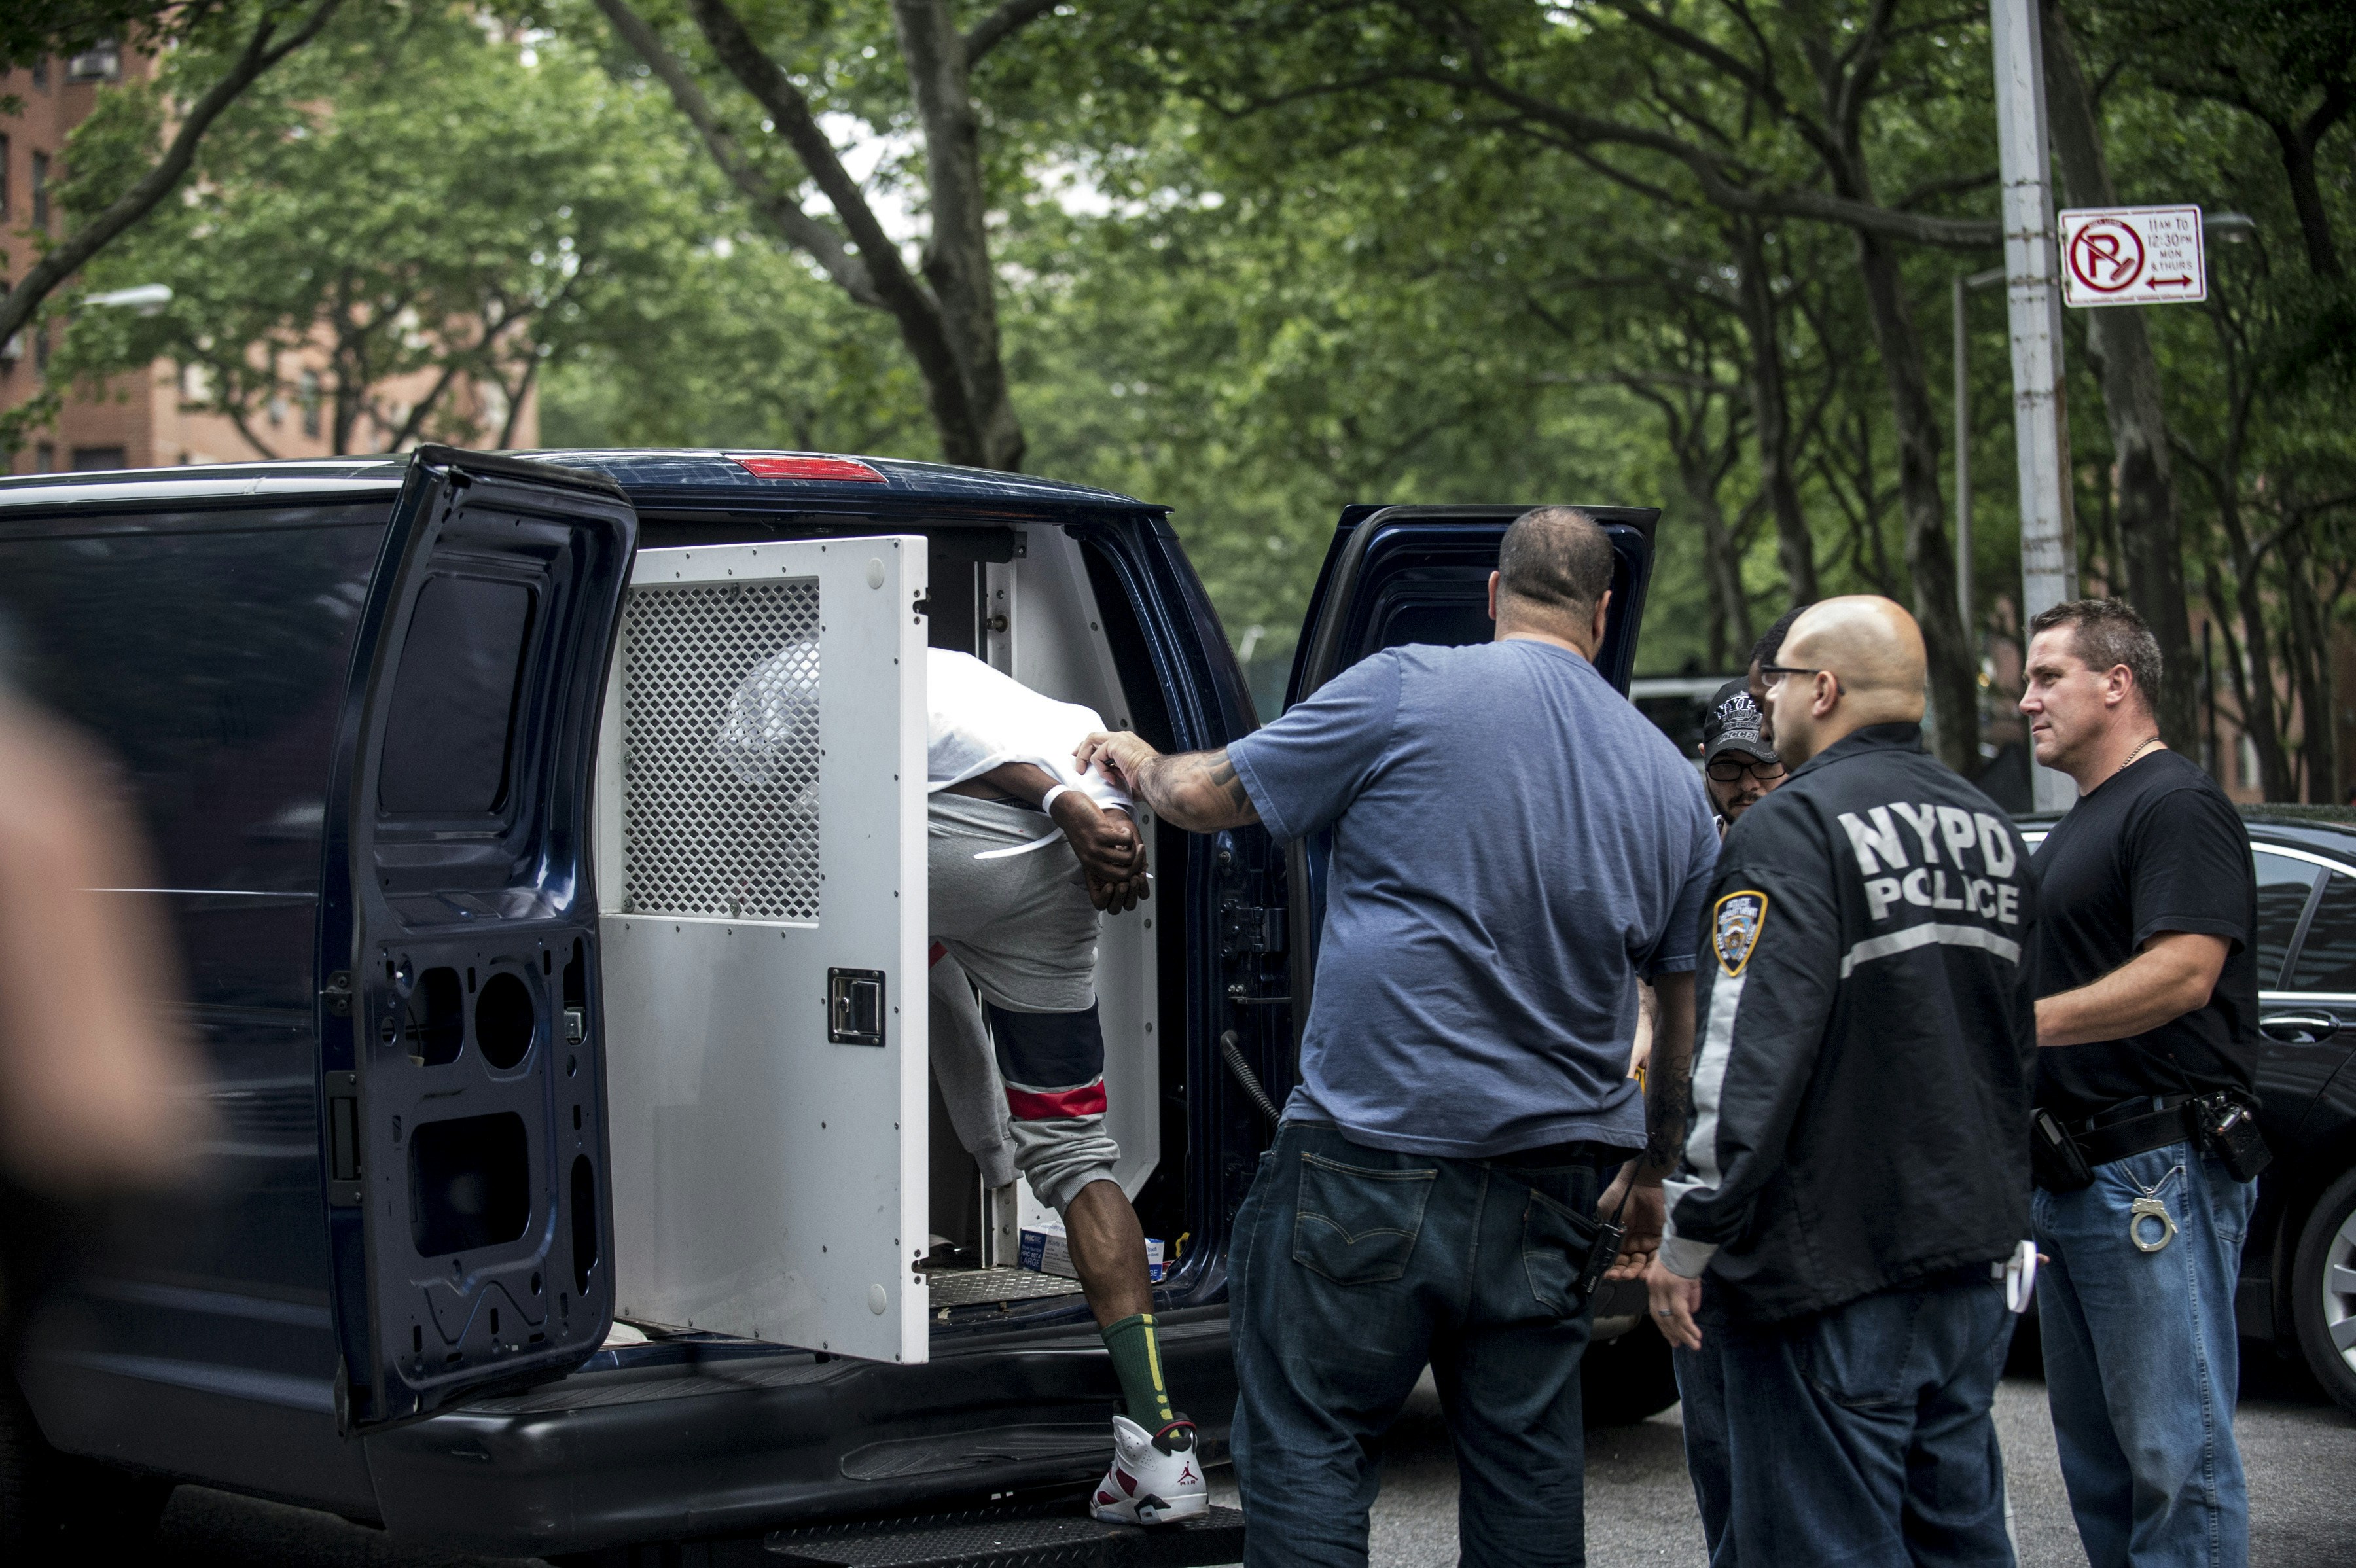 One of the dozens of suspected gang members corralled in simultaneous early-morning raids is led into a police van in the Harlem neighborhood of New York, June 4, 2014. The indictment cites 103 people, roughly 30 of whom were already in jail, with two killings, 15 shootings, and a host of other crimes. (Robert Stolarik/The New York Times)